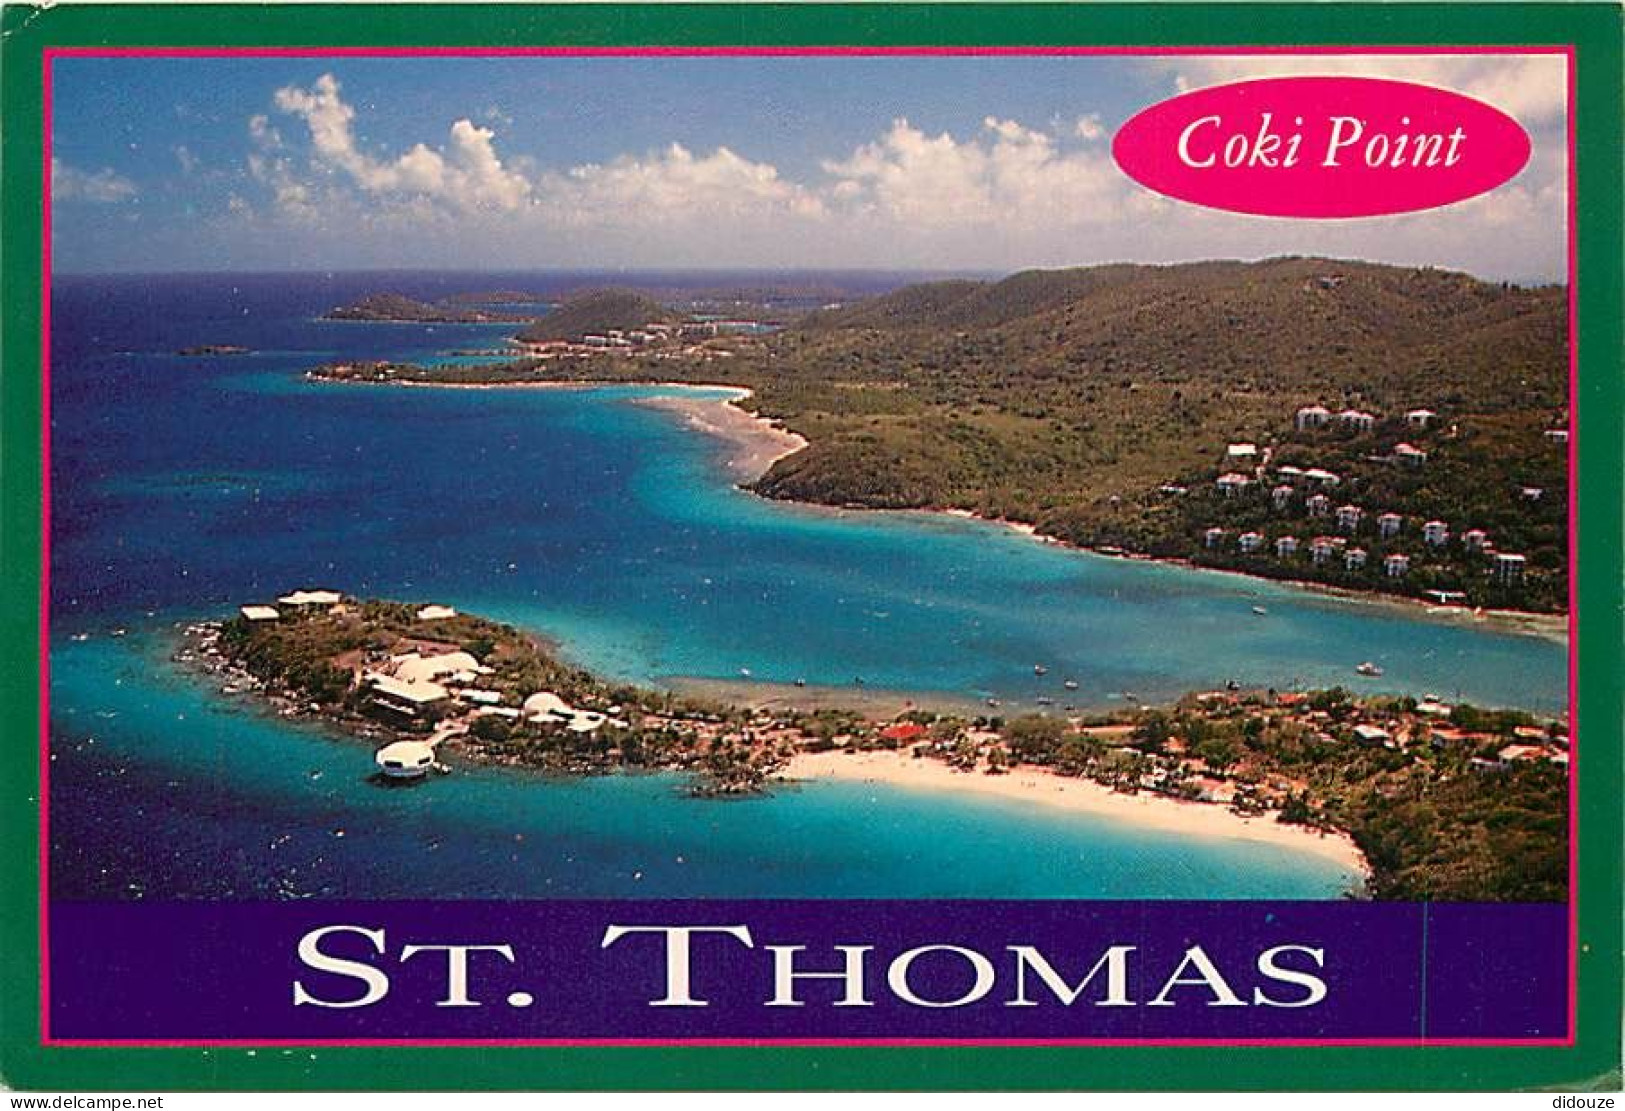 Antilles - Iles Vierges Américaines - U S Virgin Islands - St Thomas - Coki Point Beach And The Coral World Undenwater O - Vierges (Iles), Amér.